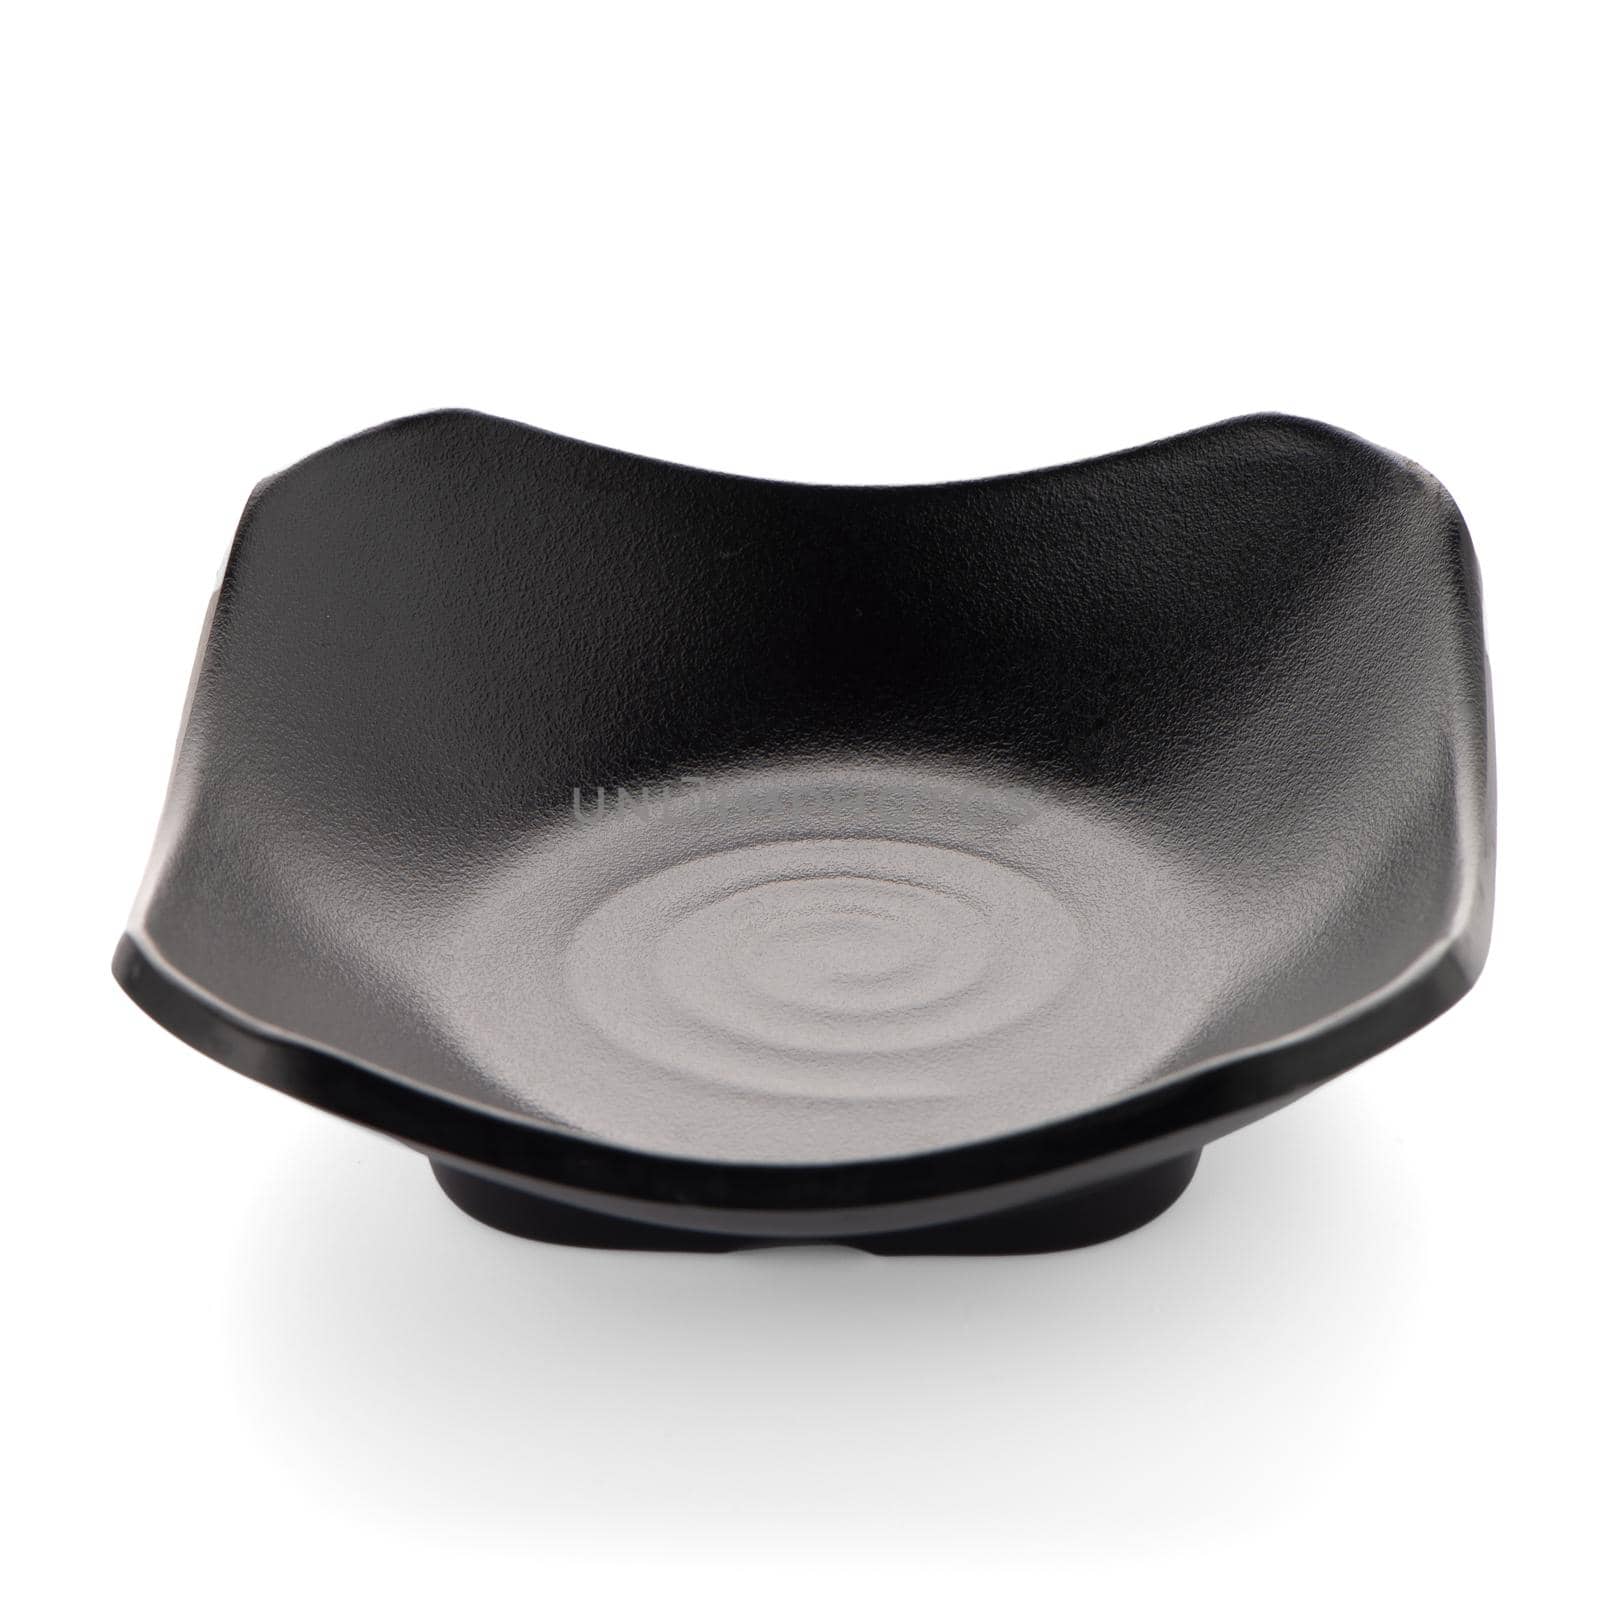 Small black bowl isolated on white background.